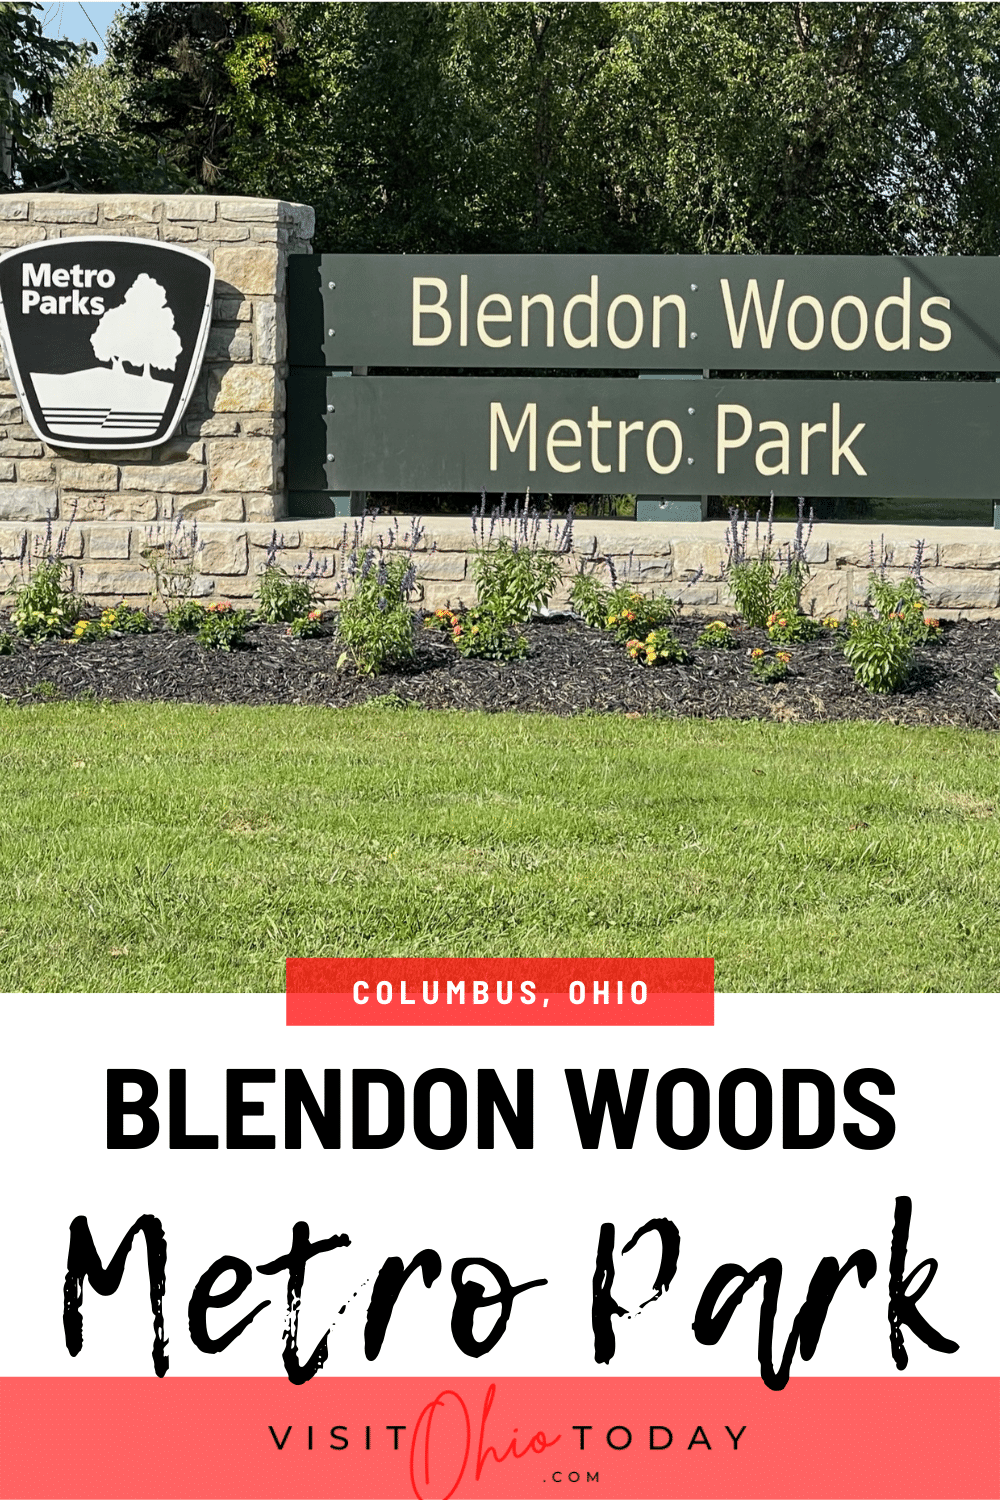 pinterest pin with a picture of the Blendon Woods Metro Park sign with green trees in the back ground. Bottom has a red rectangle with the words columbus ohio in white. Under that is a white box with black text that says: blendon woods metro park. On the bottom of the image is a red rectangle with the visitohiotoday logo